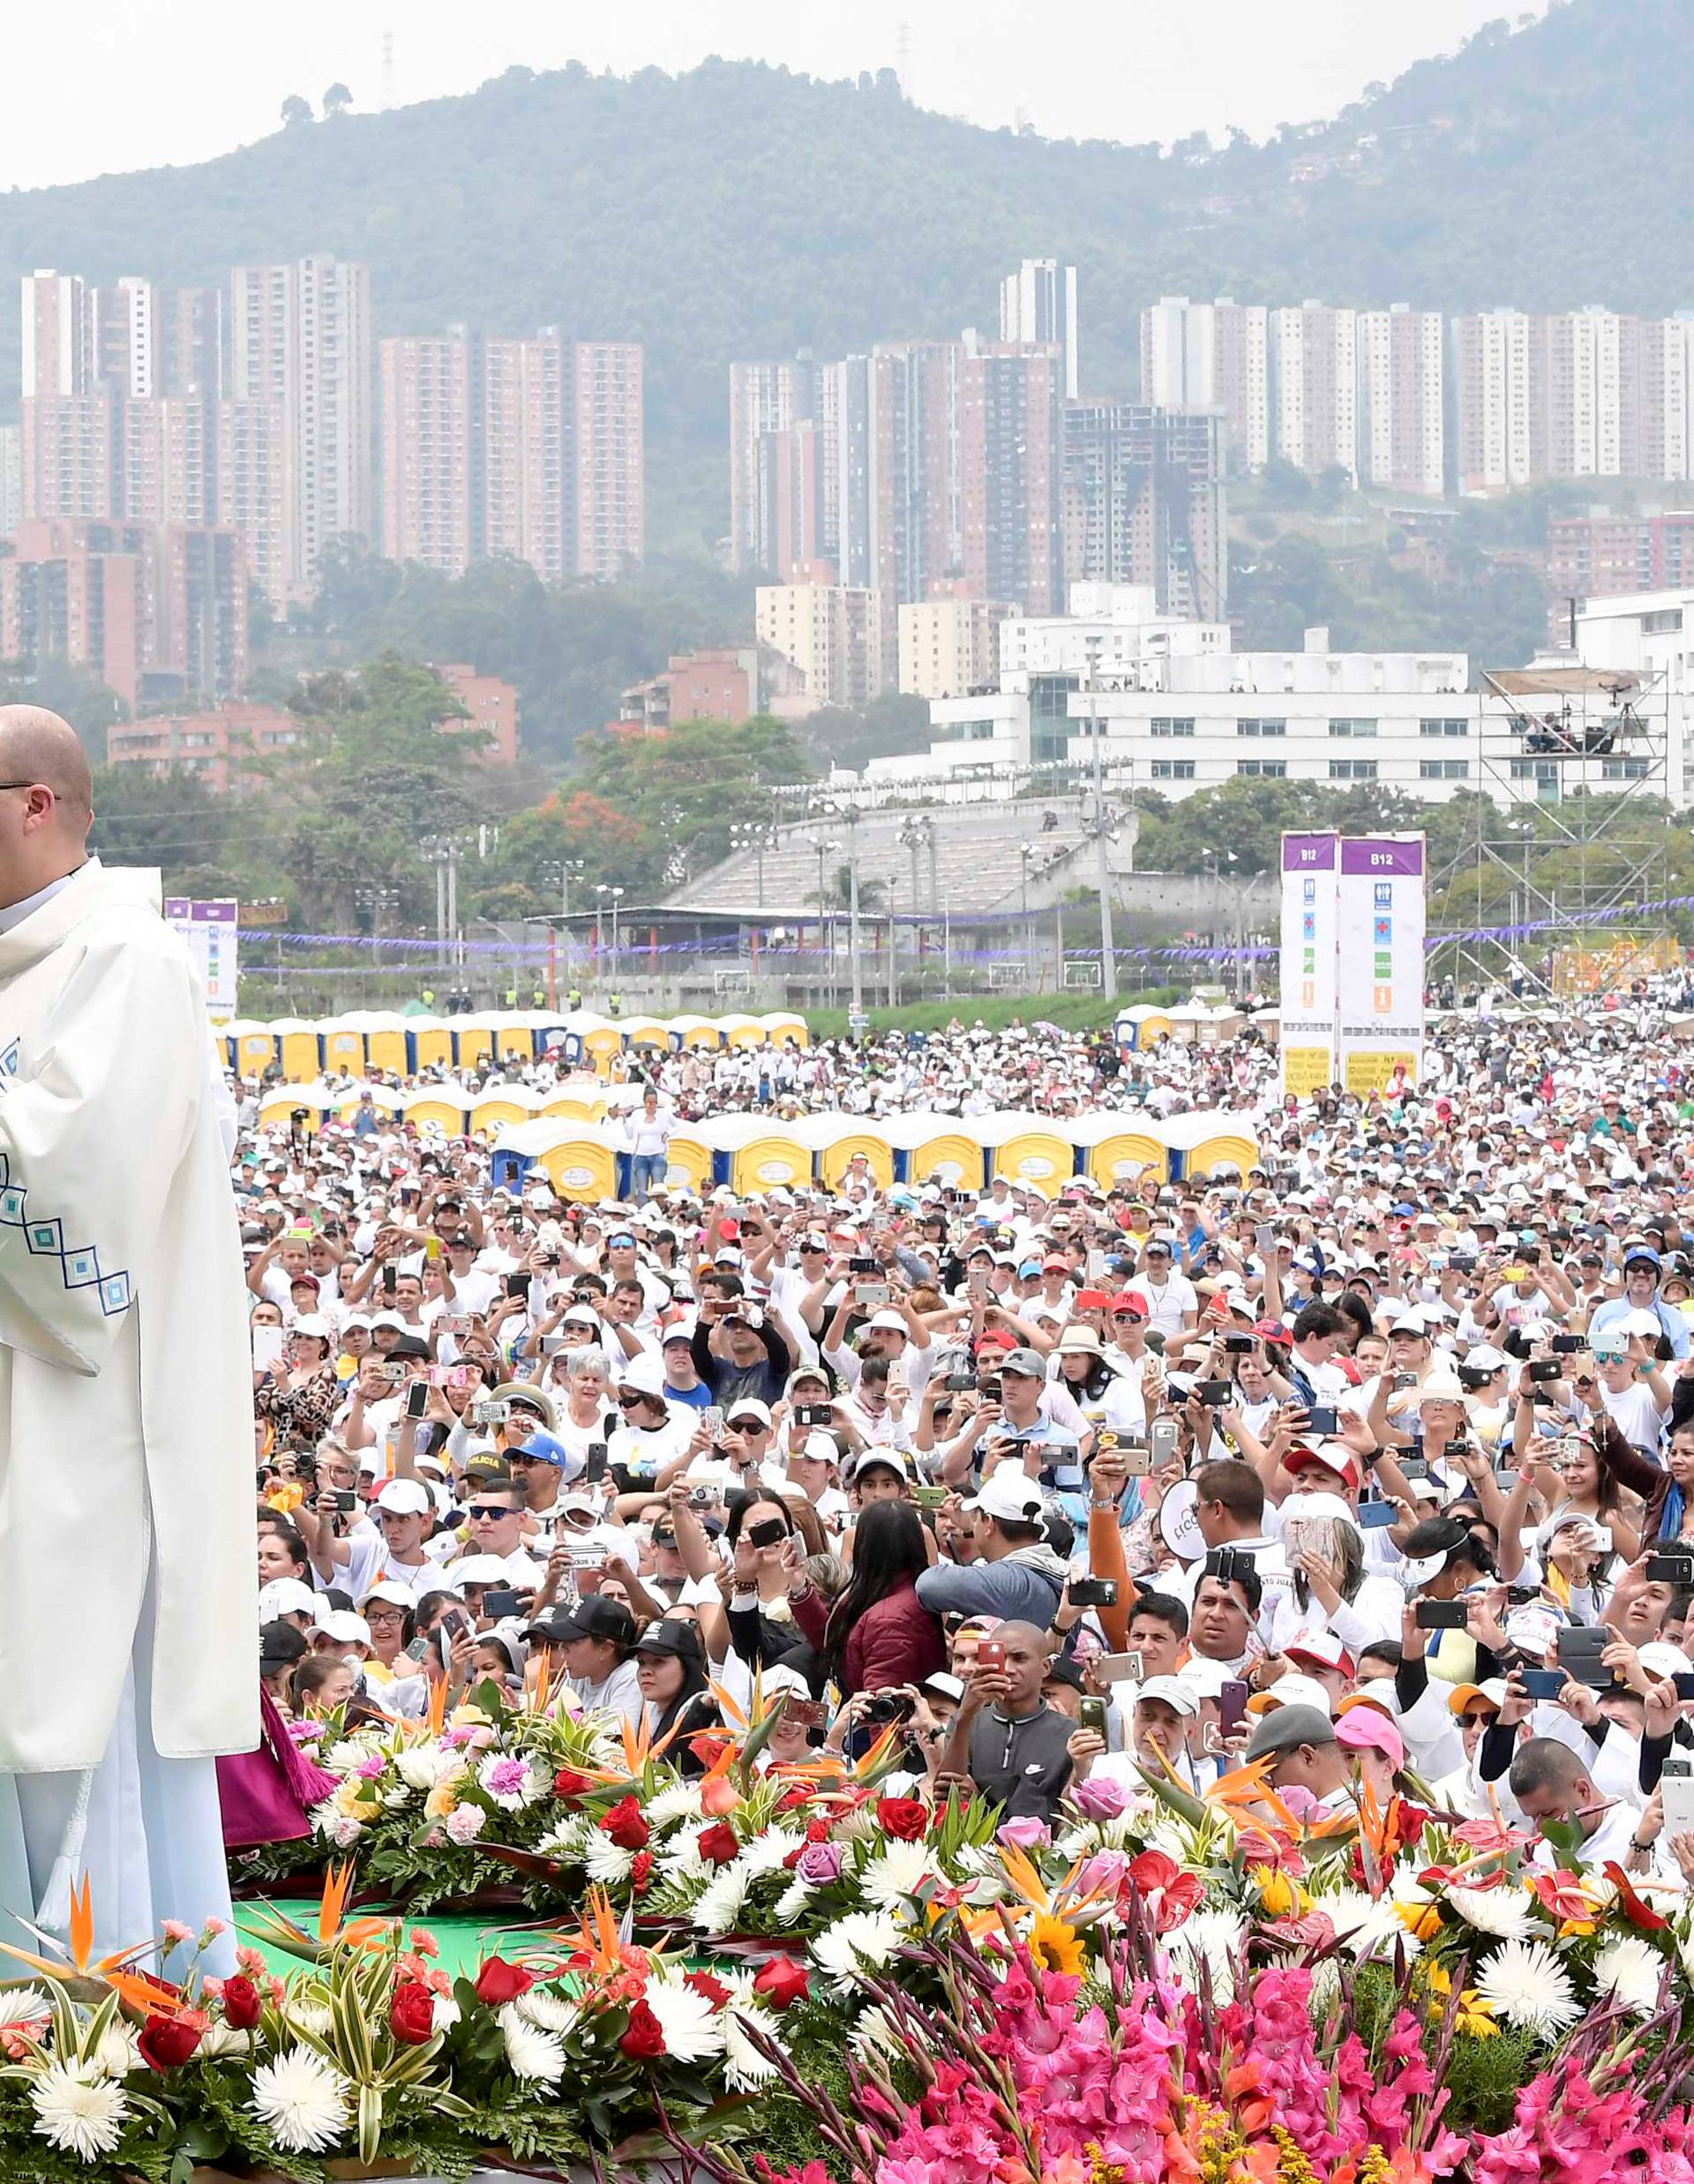 Pope Francis leads a mass at Enrique Olaya Herrera airport in Medellin